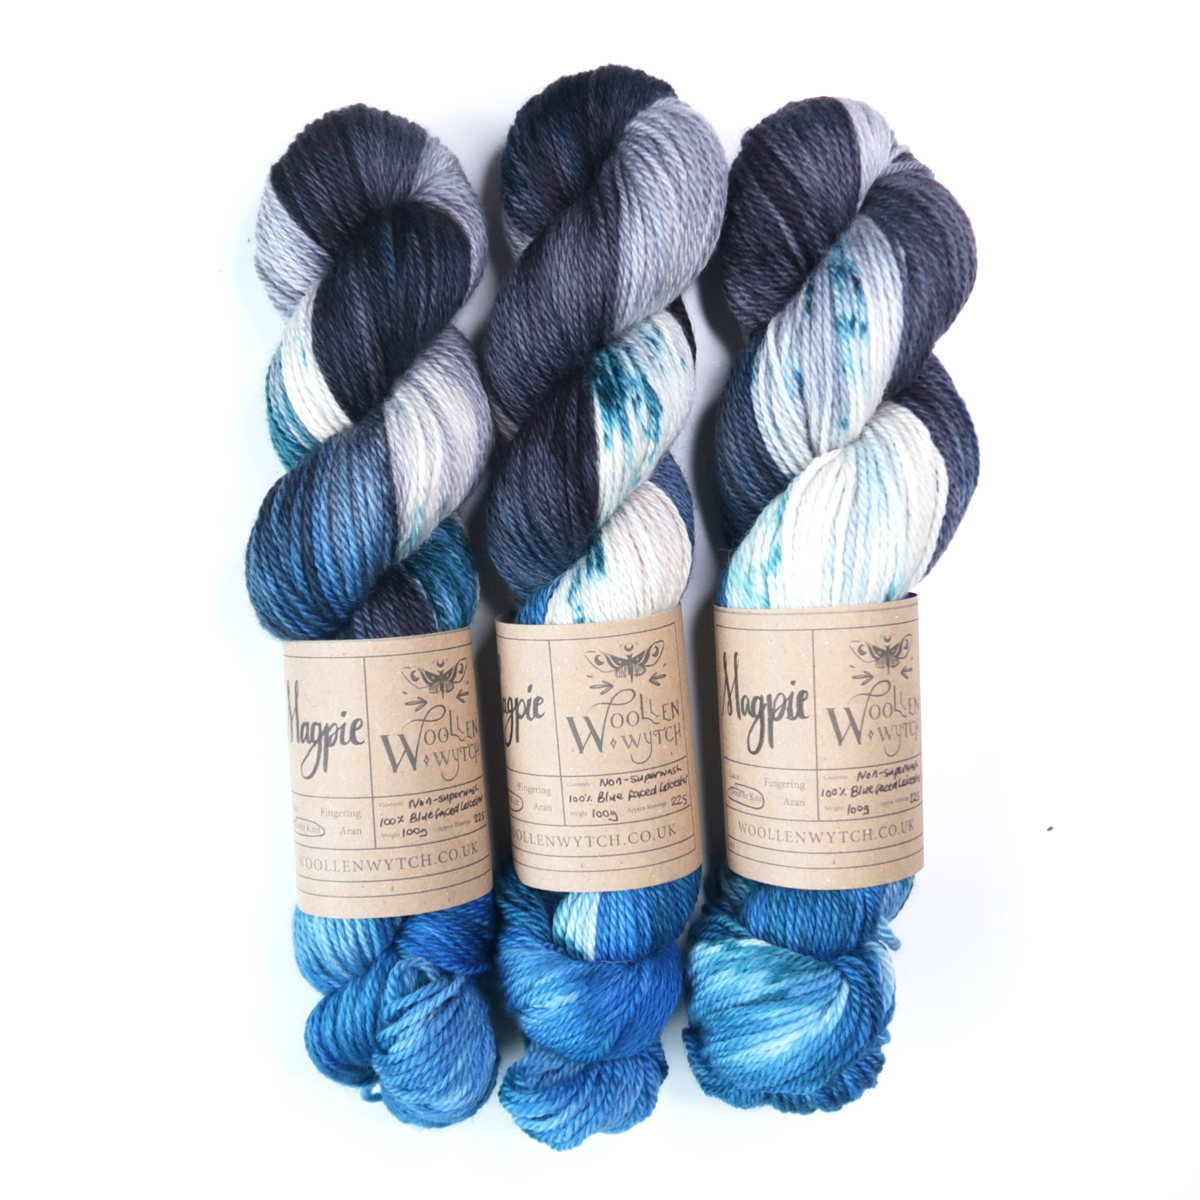 Magpie hand dyed yarn in blue, silver and black on bluefaced Leicester British yarn by Woollen Wytch